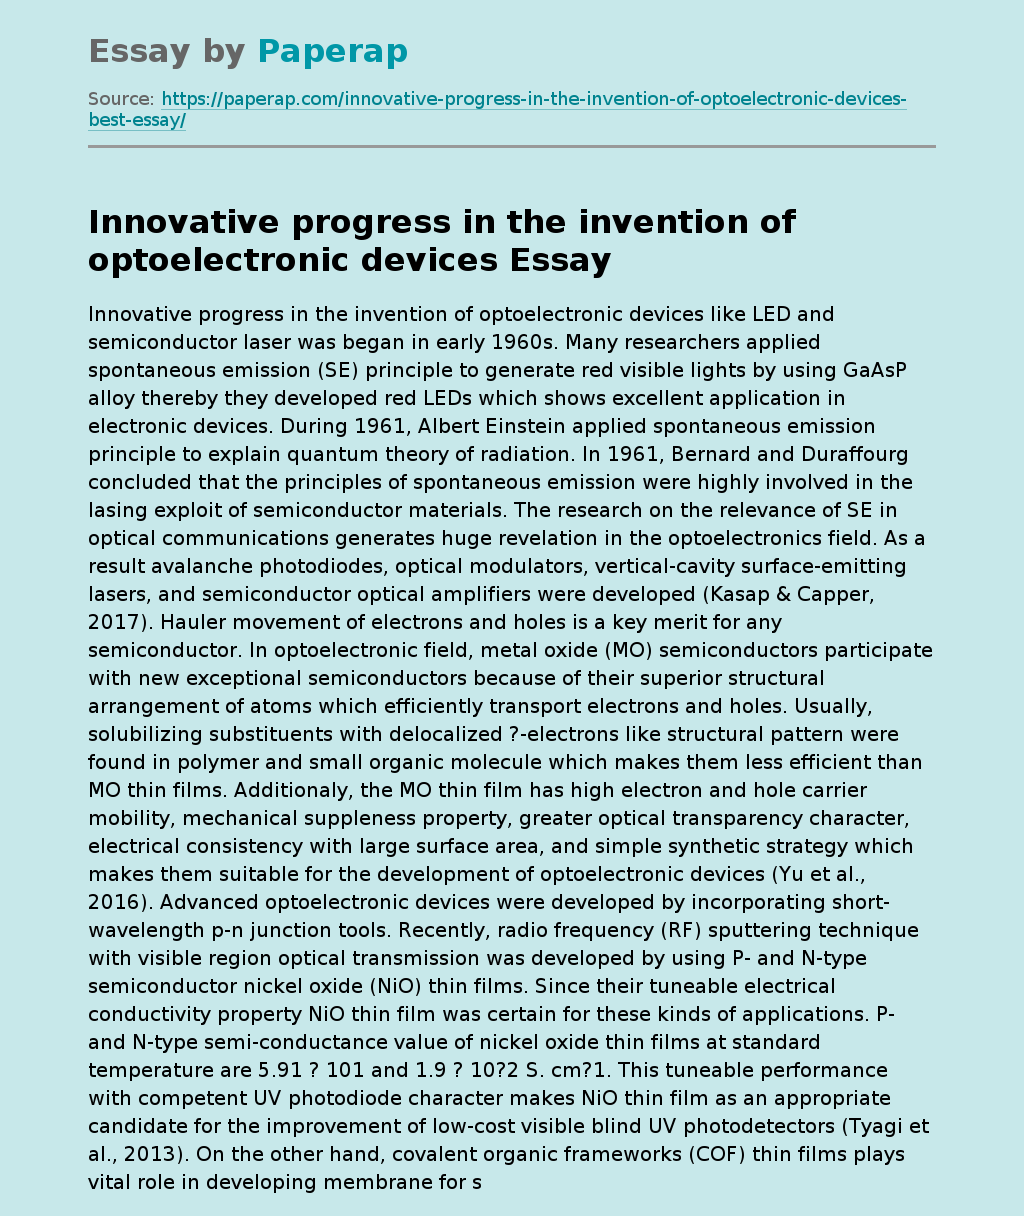 Progress in the Invention of Optoelectronic Devices